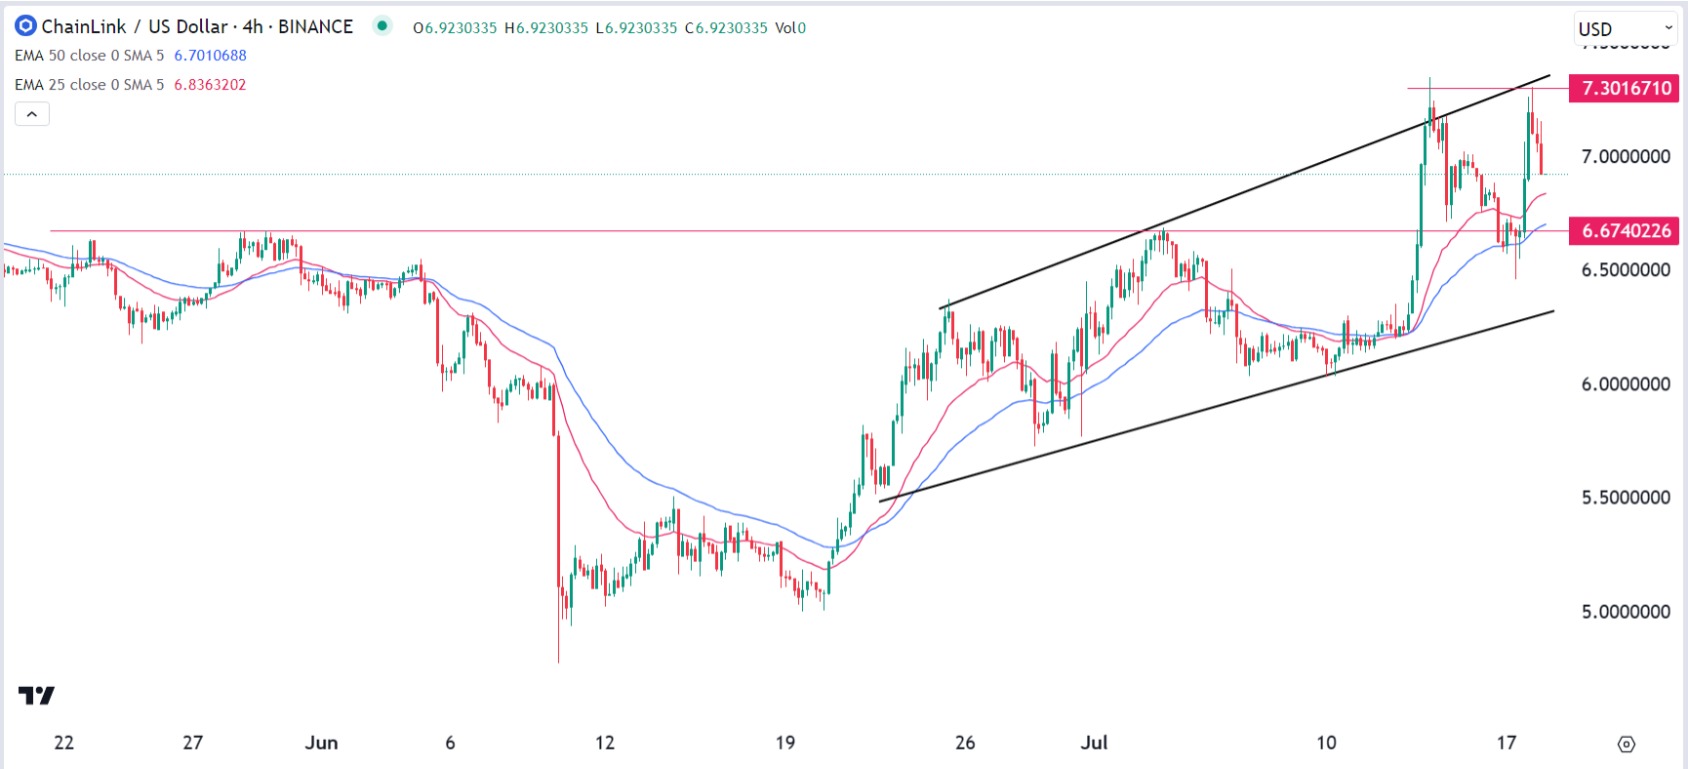 Chainlink price prediction: LINK just formed a double top pattern